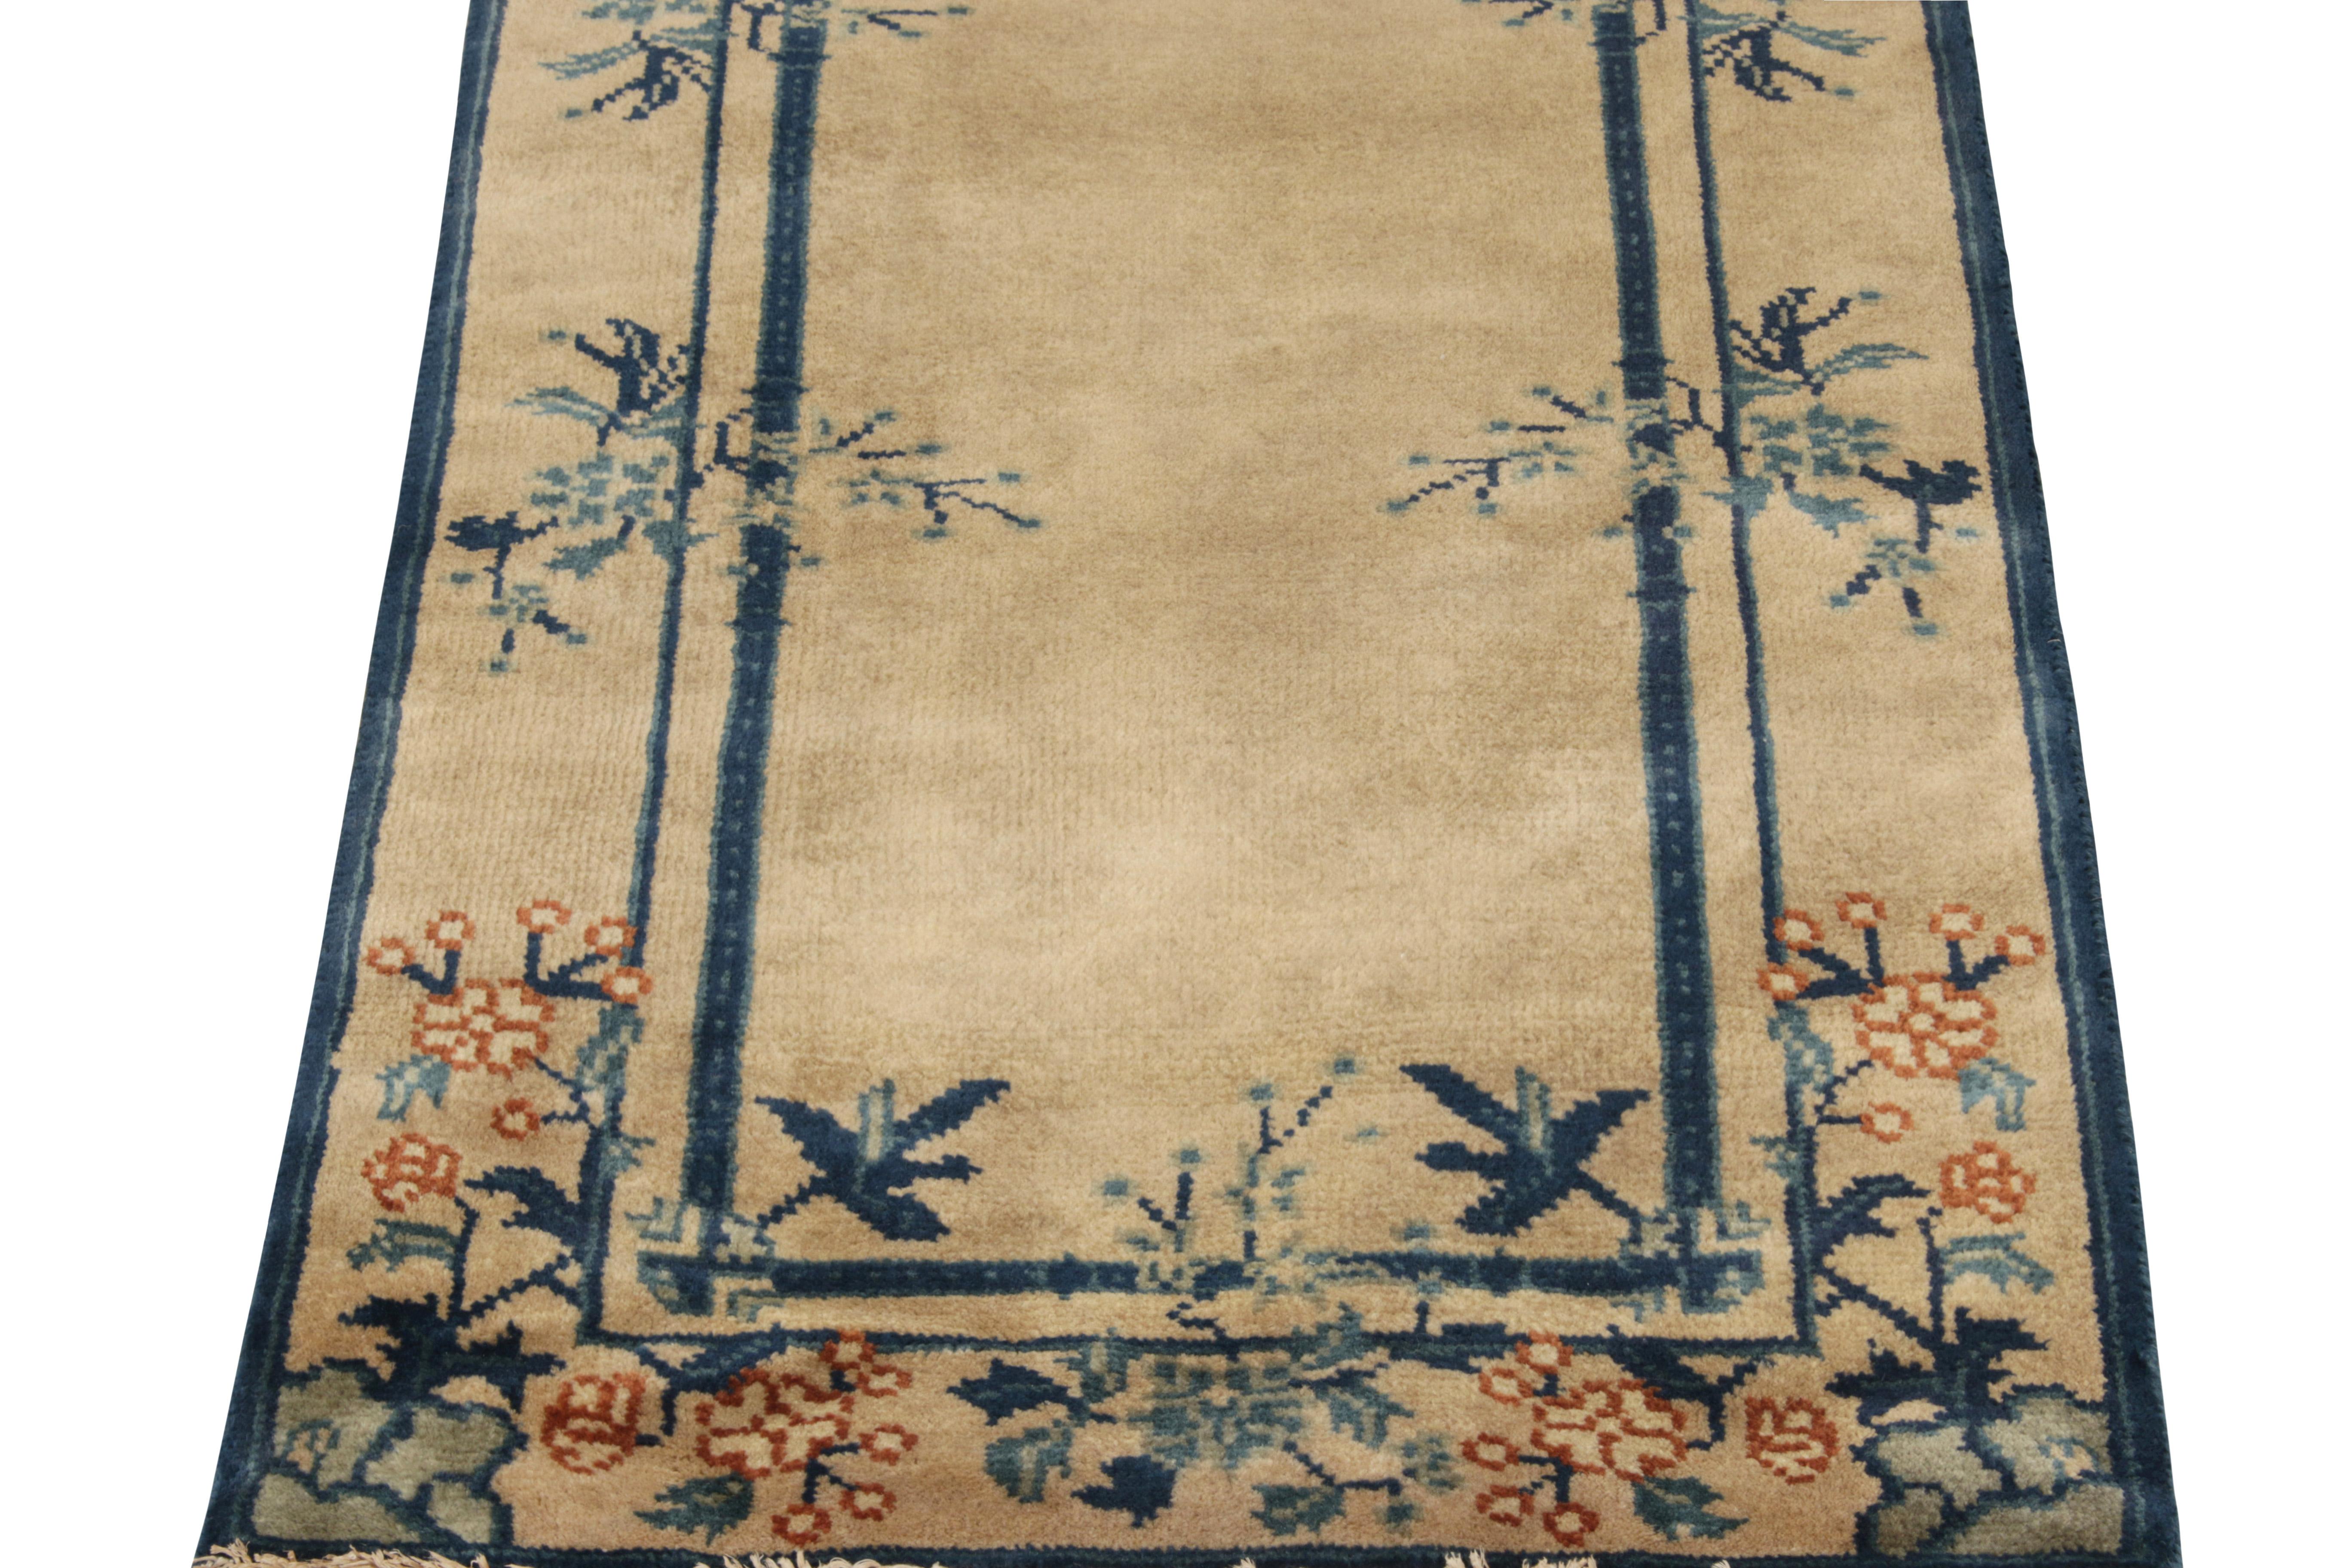 Indian Vintage Chinese Deco Style Rug in Beige Blue Green Floral Pattern by Rug & Kilim For Sale